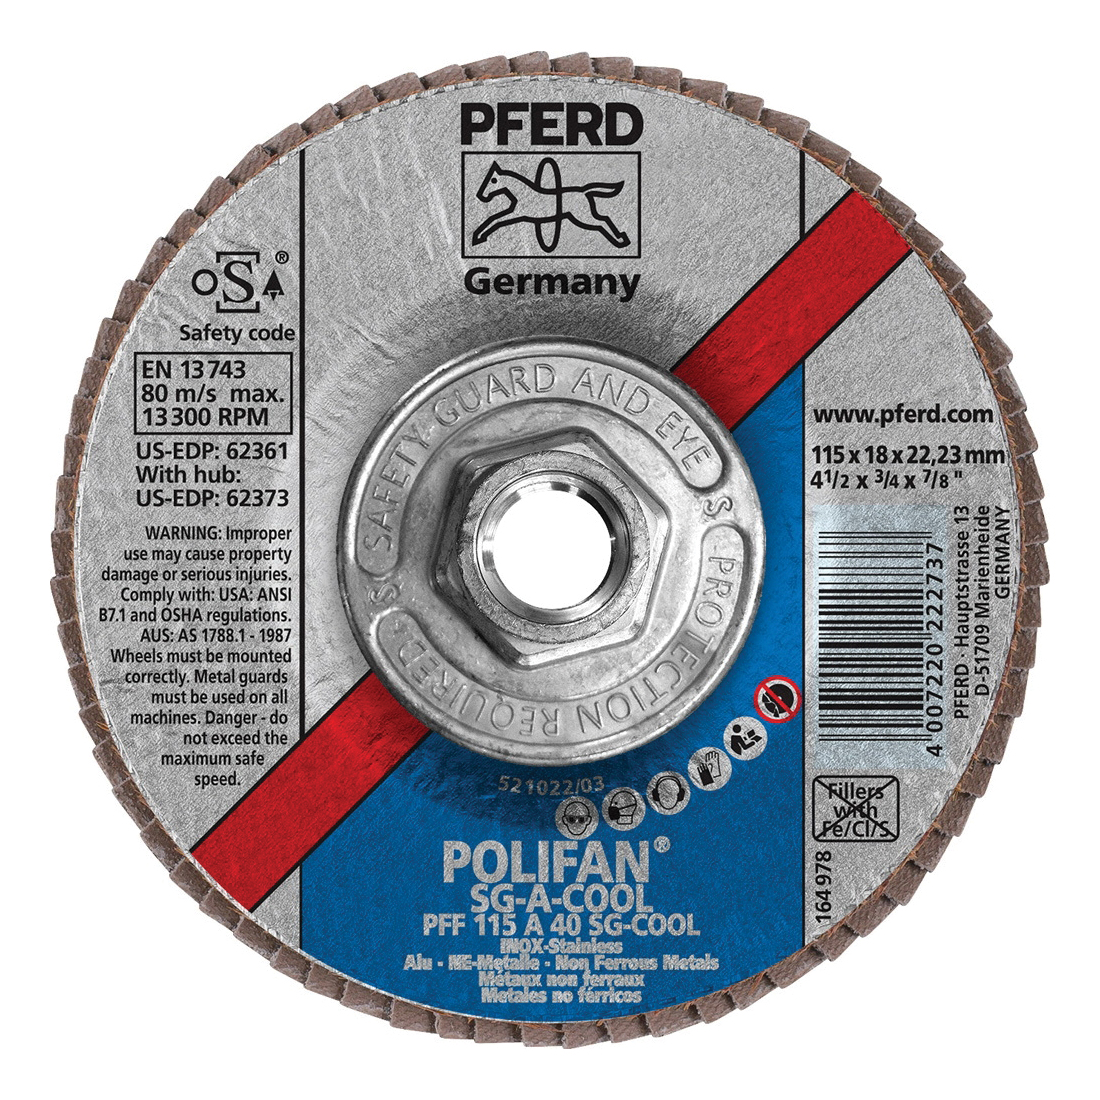 PFERD Polifan® 62373 Performance Line SG A-COOL Threaded Coated Abrasive Flap Disc, 4-1/2 in Dia, 40 Grit, Aluminum Oxide Abrasive, Type 27 Flat Disc